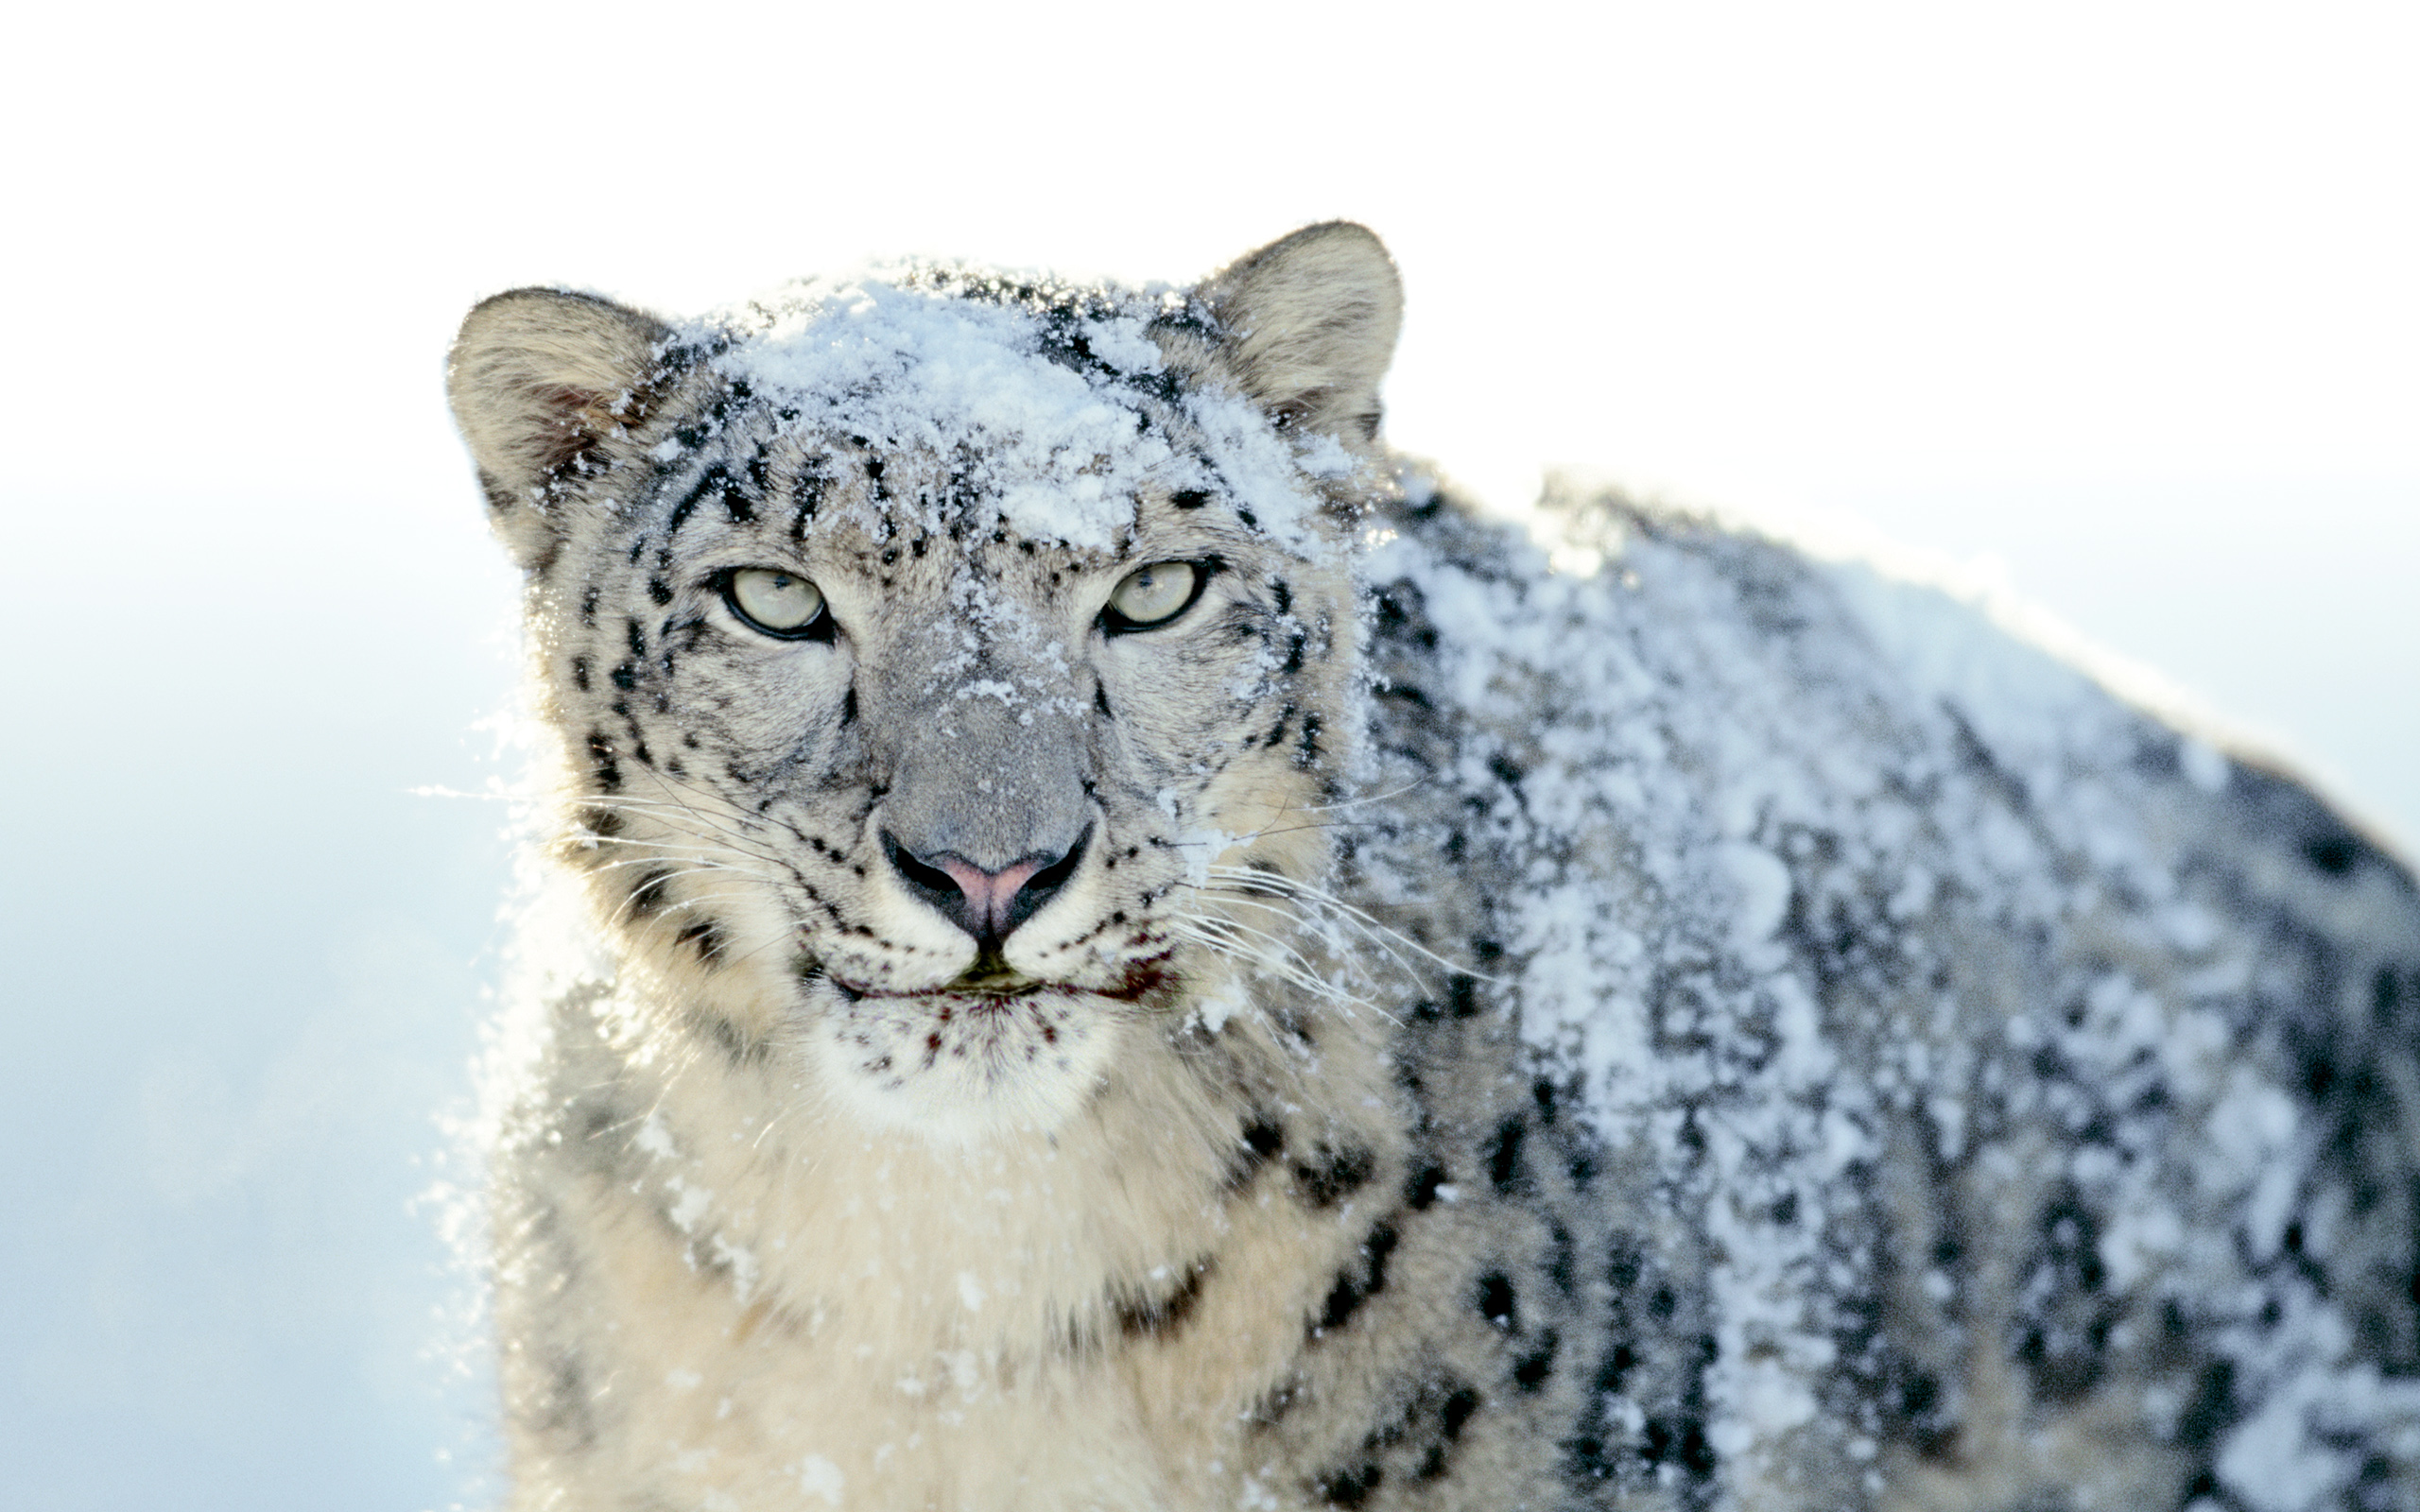 The Apple Mac Os X Snow Leopard Wallpaper Click Picture For High